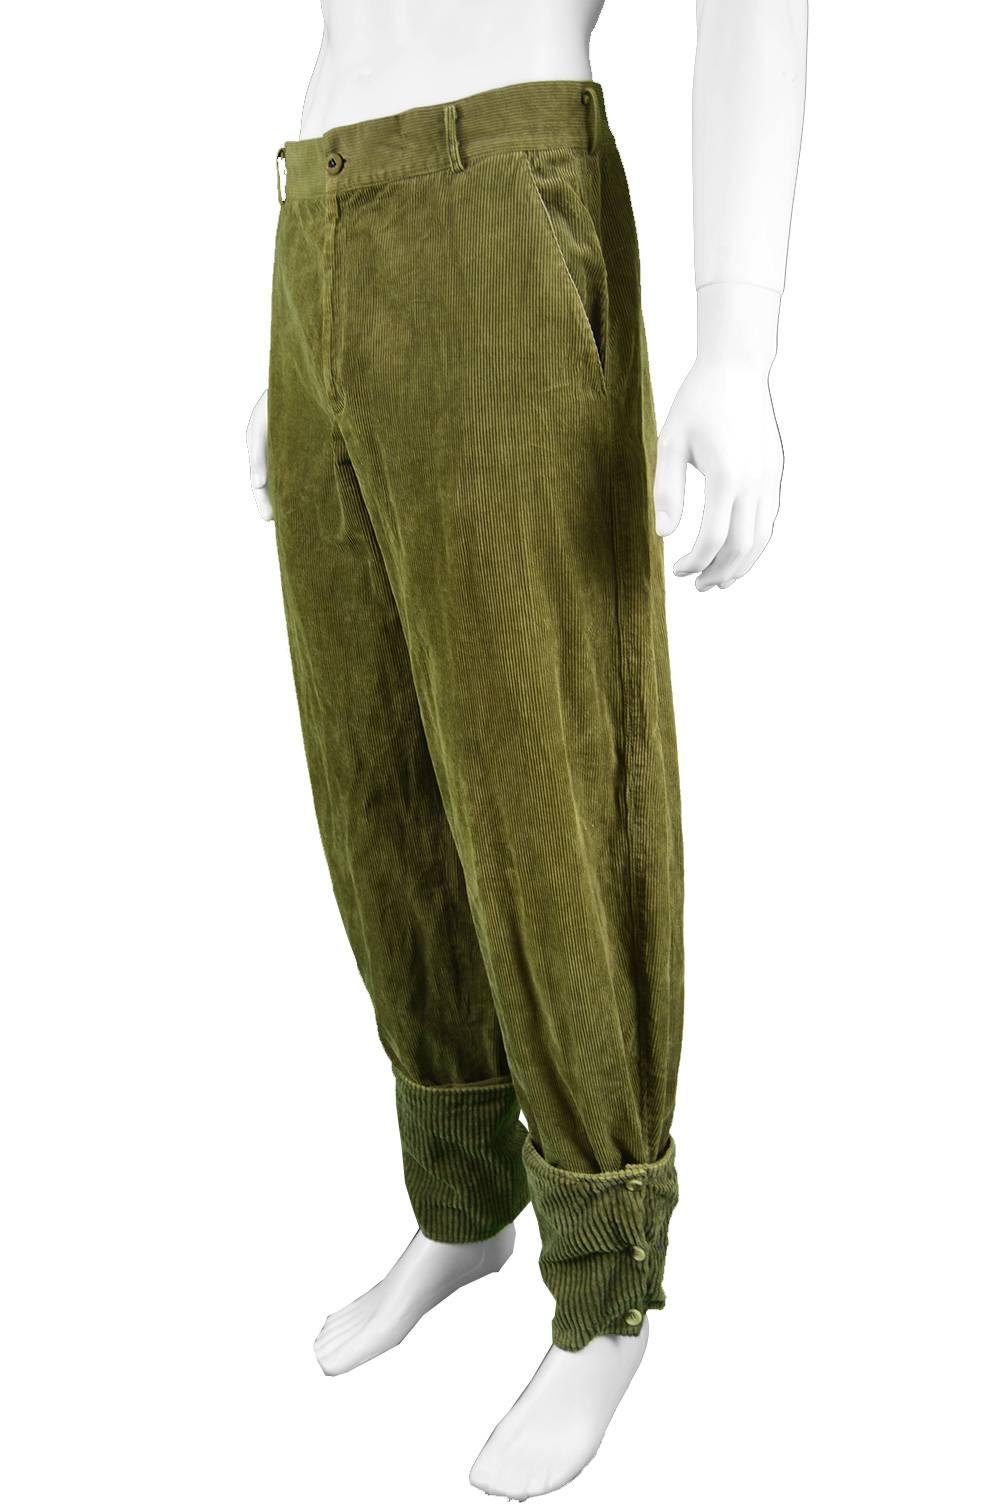 Gianni Versace Men's Green Corduroy Pants with Jumbo Cord Turn Ups, 1980s In Excellent Condition For Sale In Doncaster, South Yorkshire